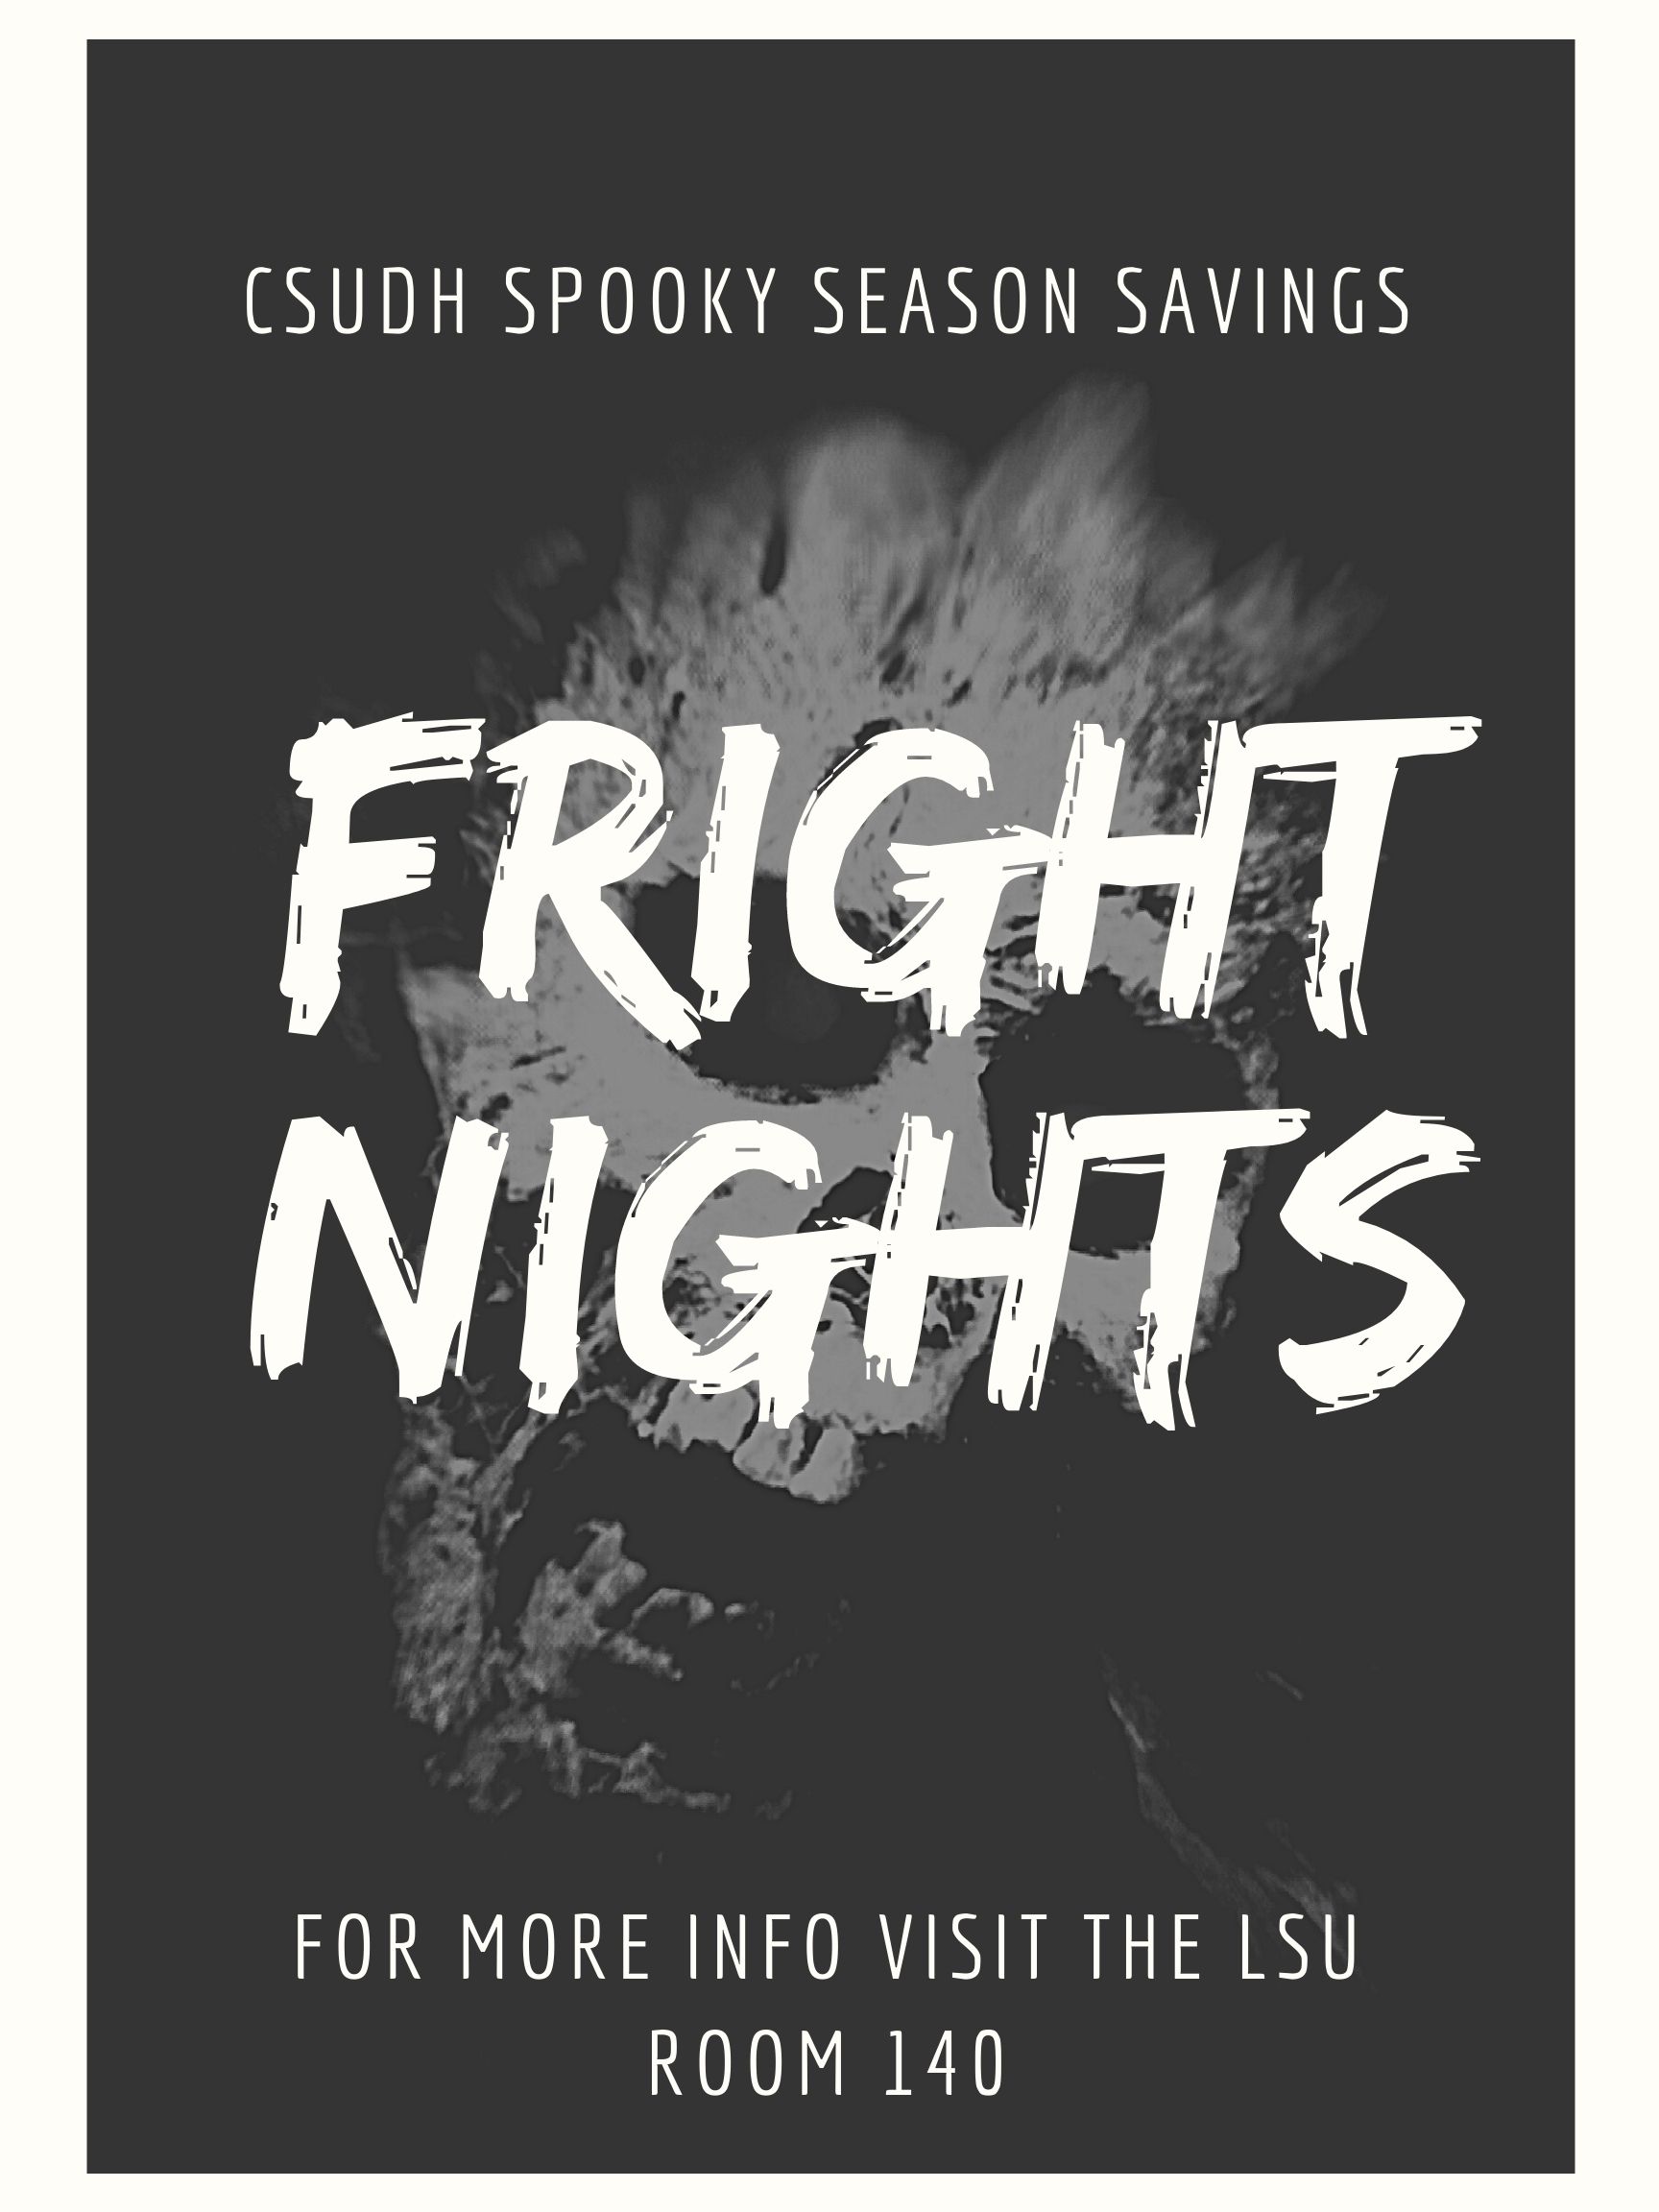 Get Spooked on a budget; CSUDH theme-park discount